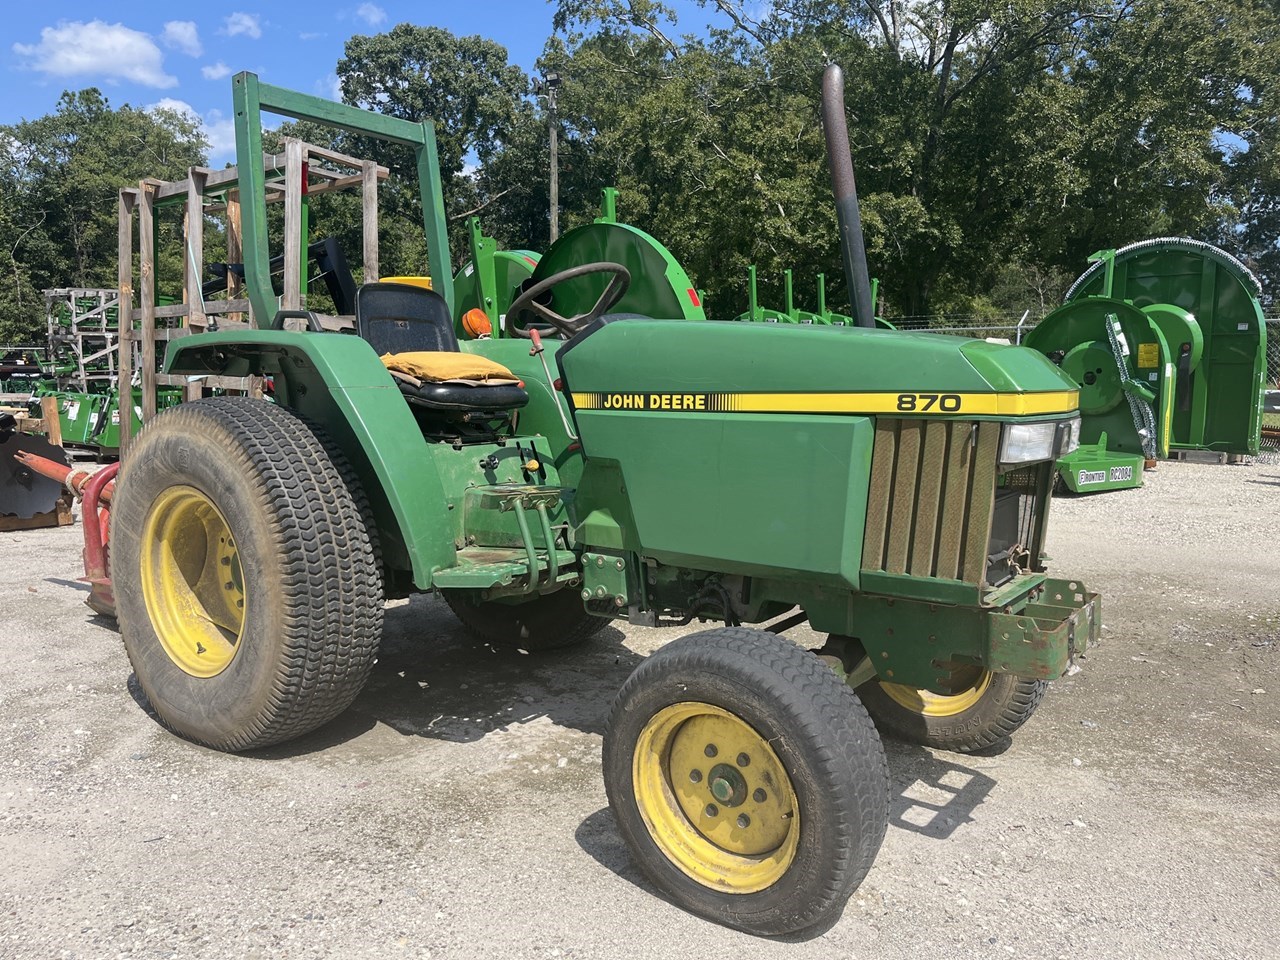 1997 John Deere 870 Tractor - Compact Utility For Sale